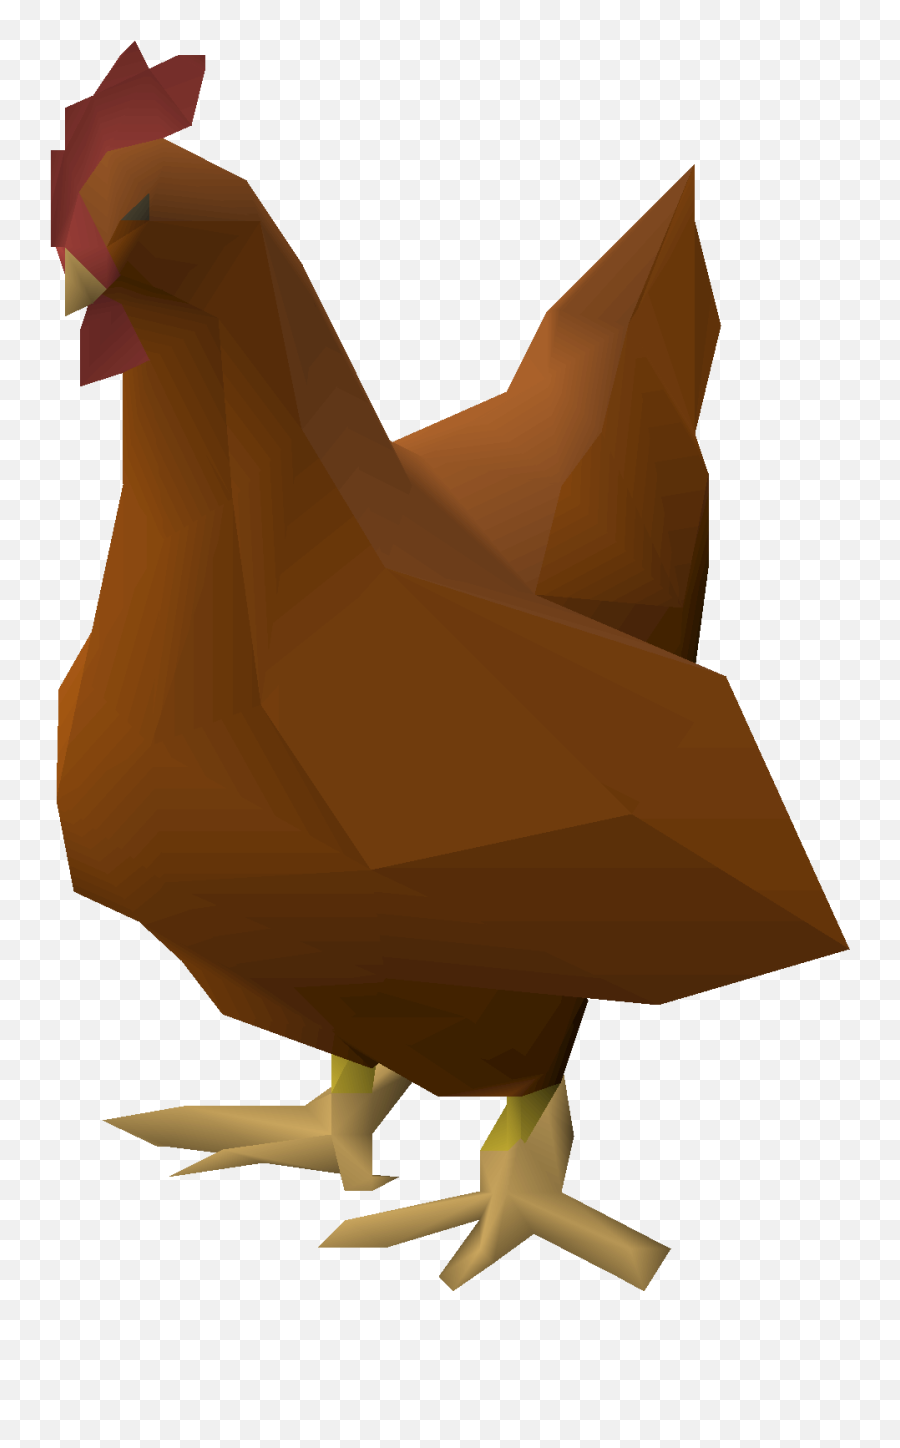 Rooster - Comb Emoji,Rooster Png